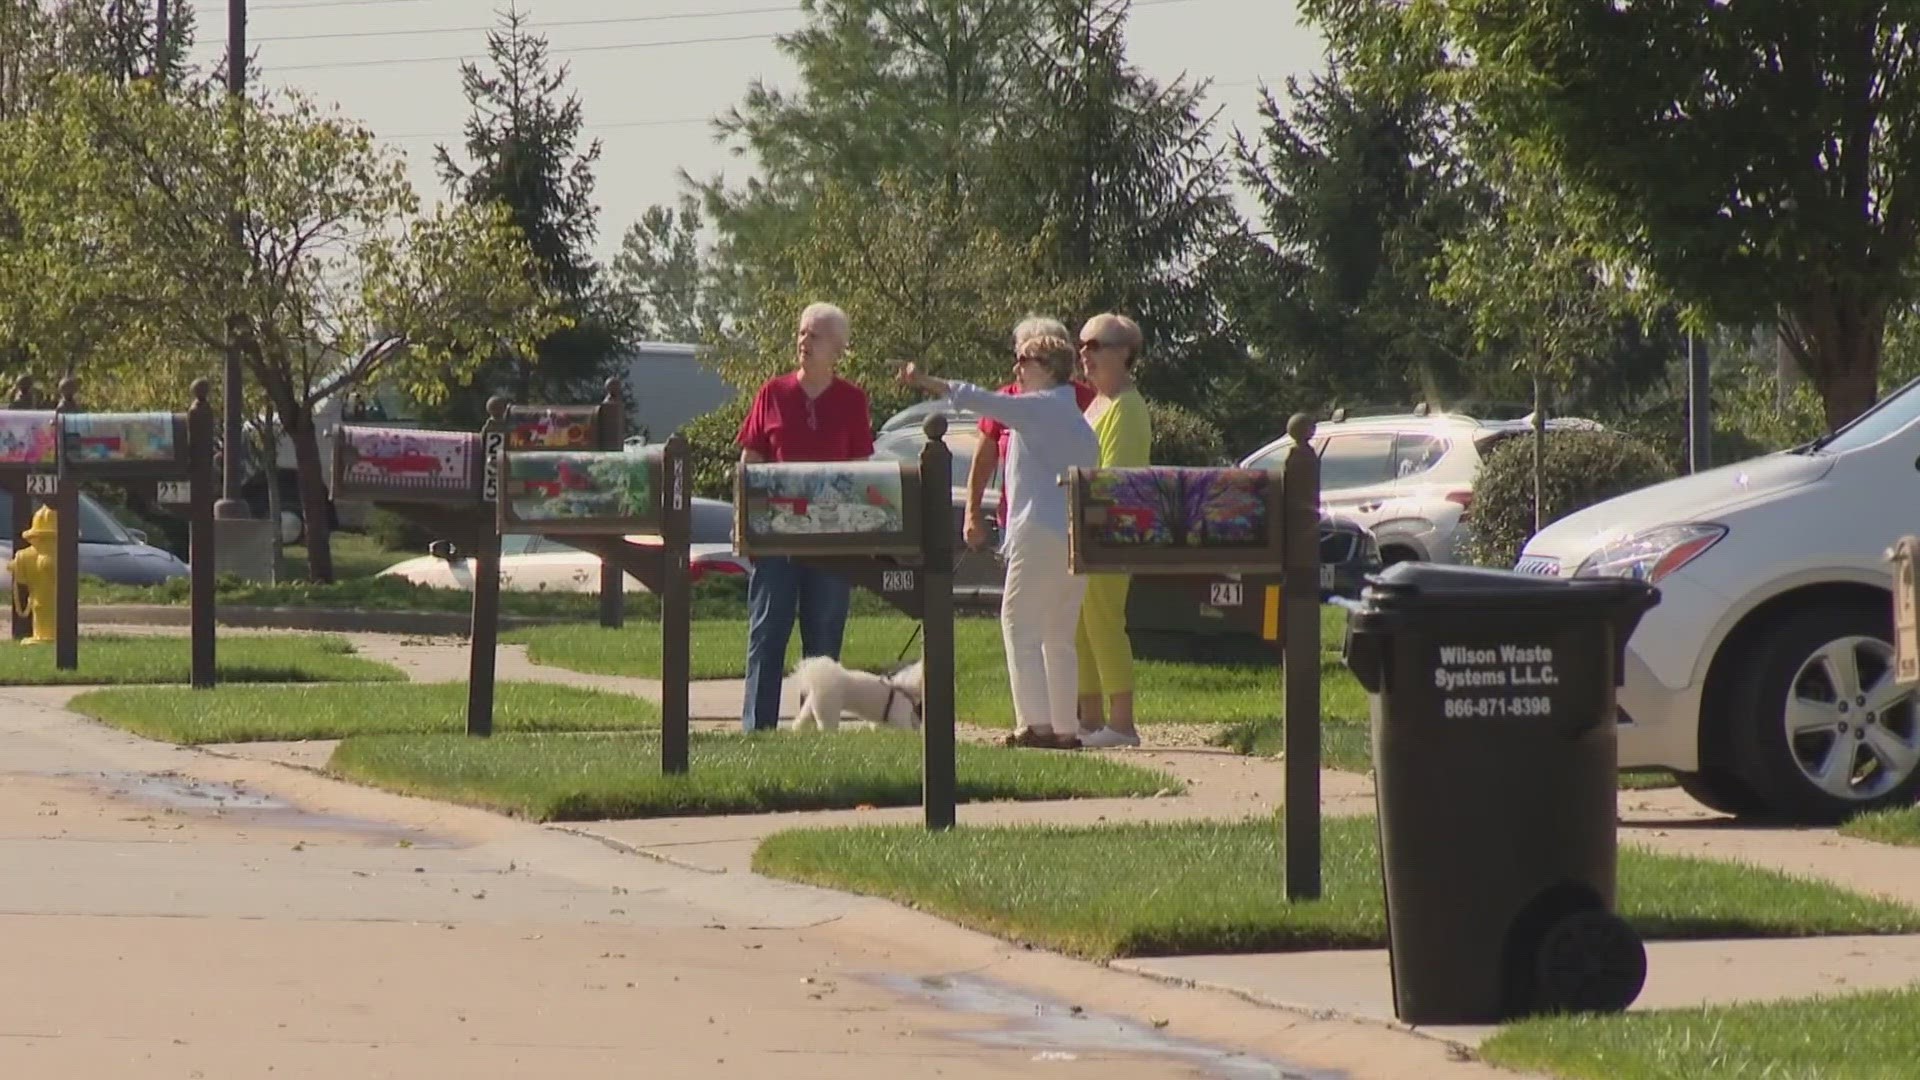 The Wentzville area was hit severely by storm damage Tuesday night. Several residents talk about how they were impacted by the weather.